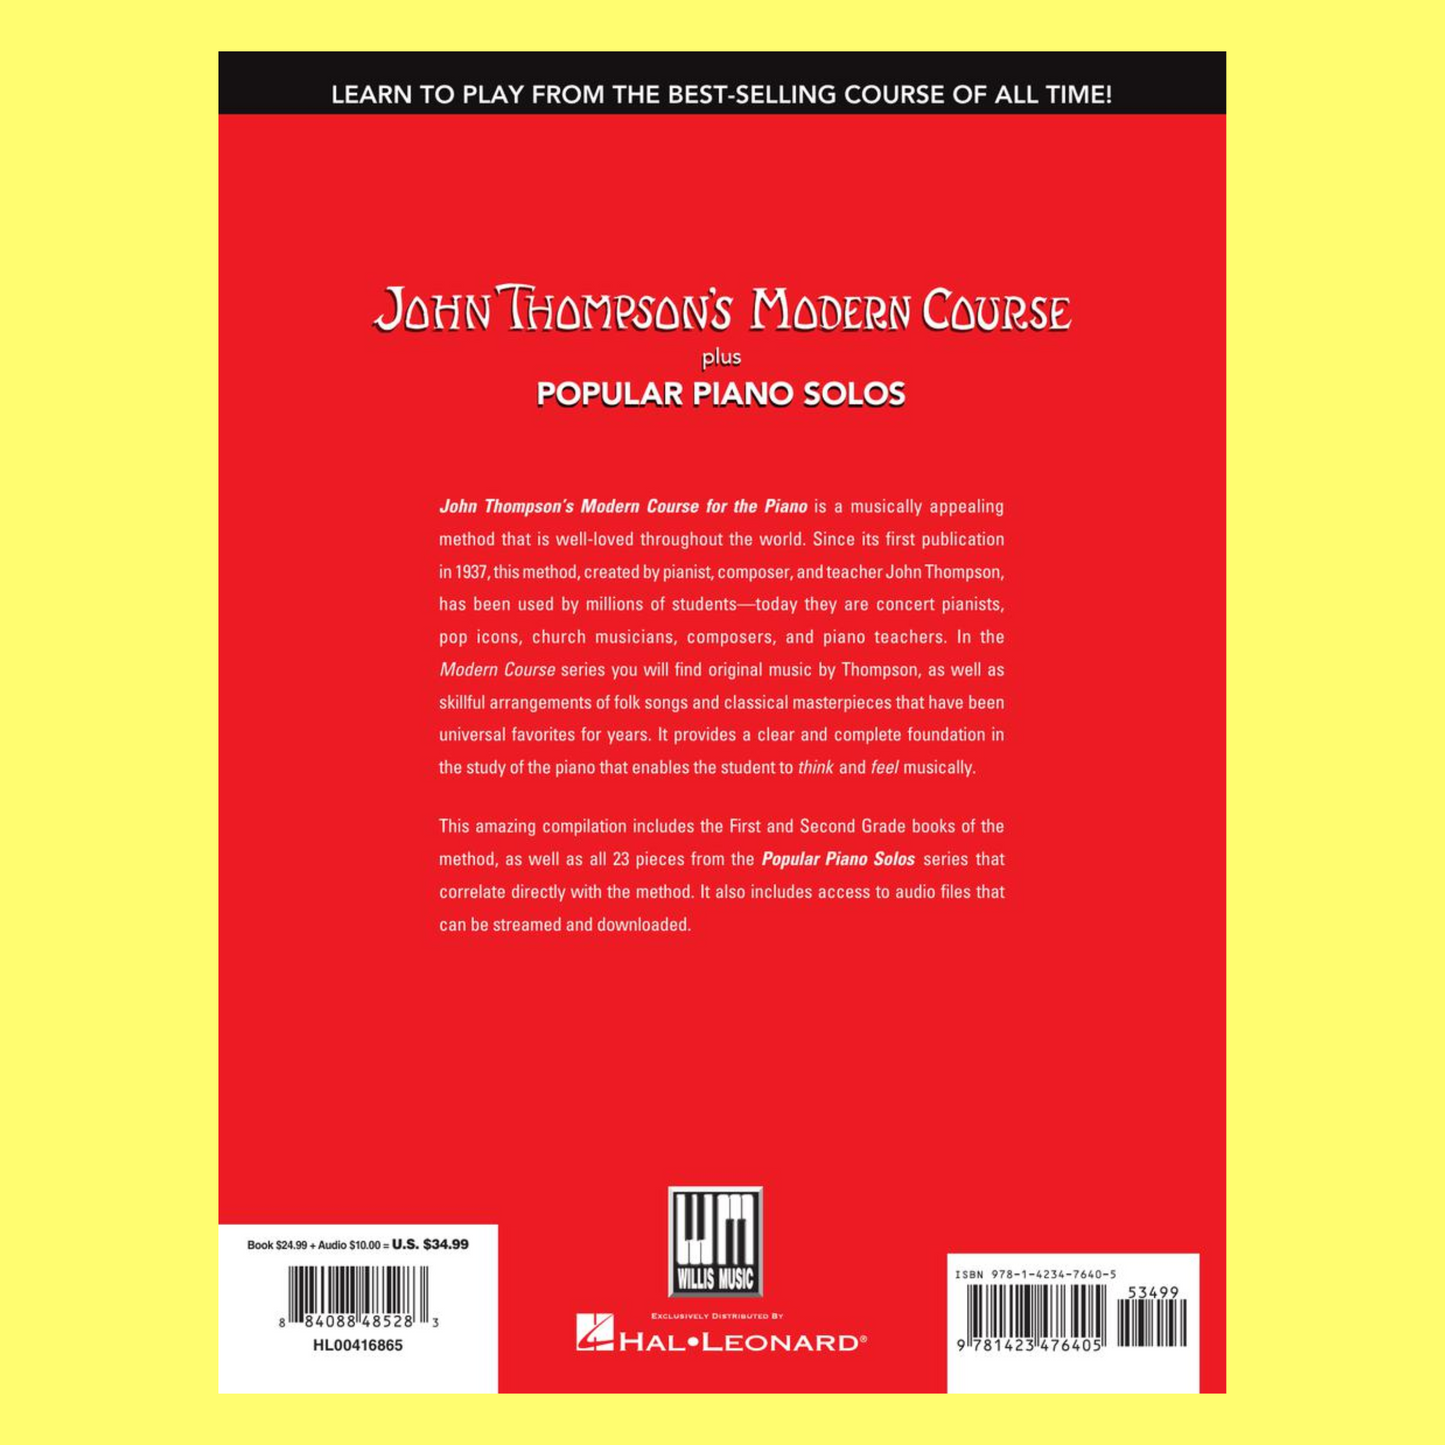 John Thompson's Modern Course plus Popular Piano Solos Bundle - 4 Books In One